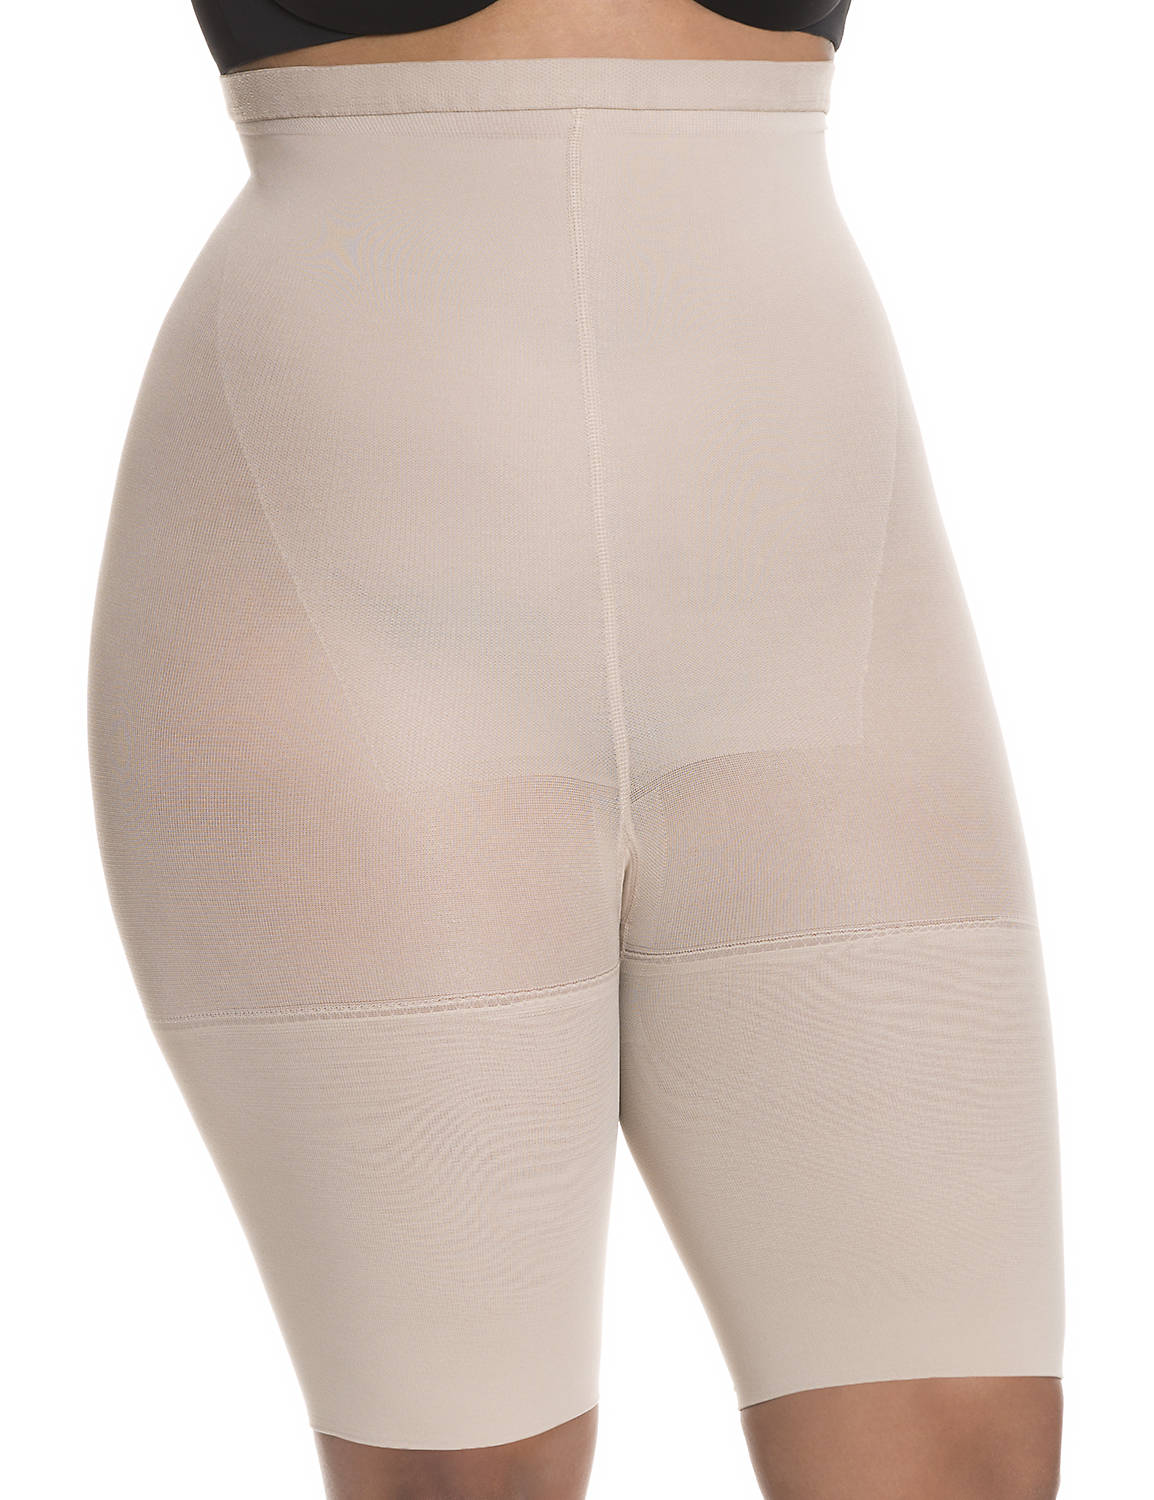 NUDE SUPER POWER PANTY Product Image 1